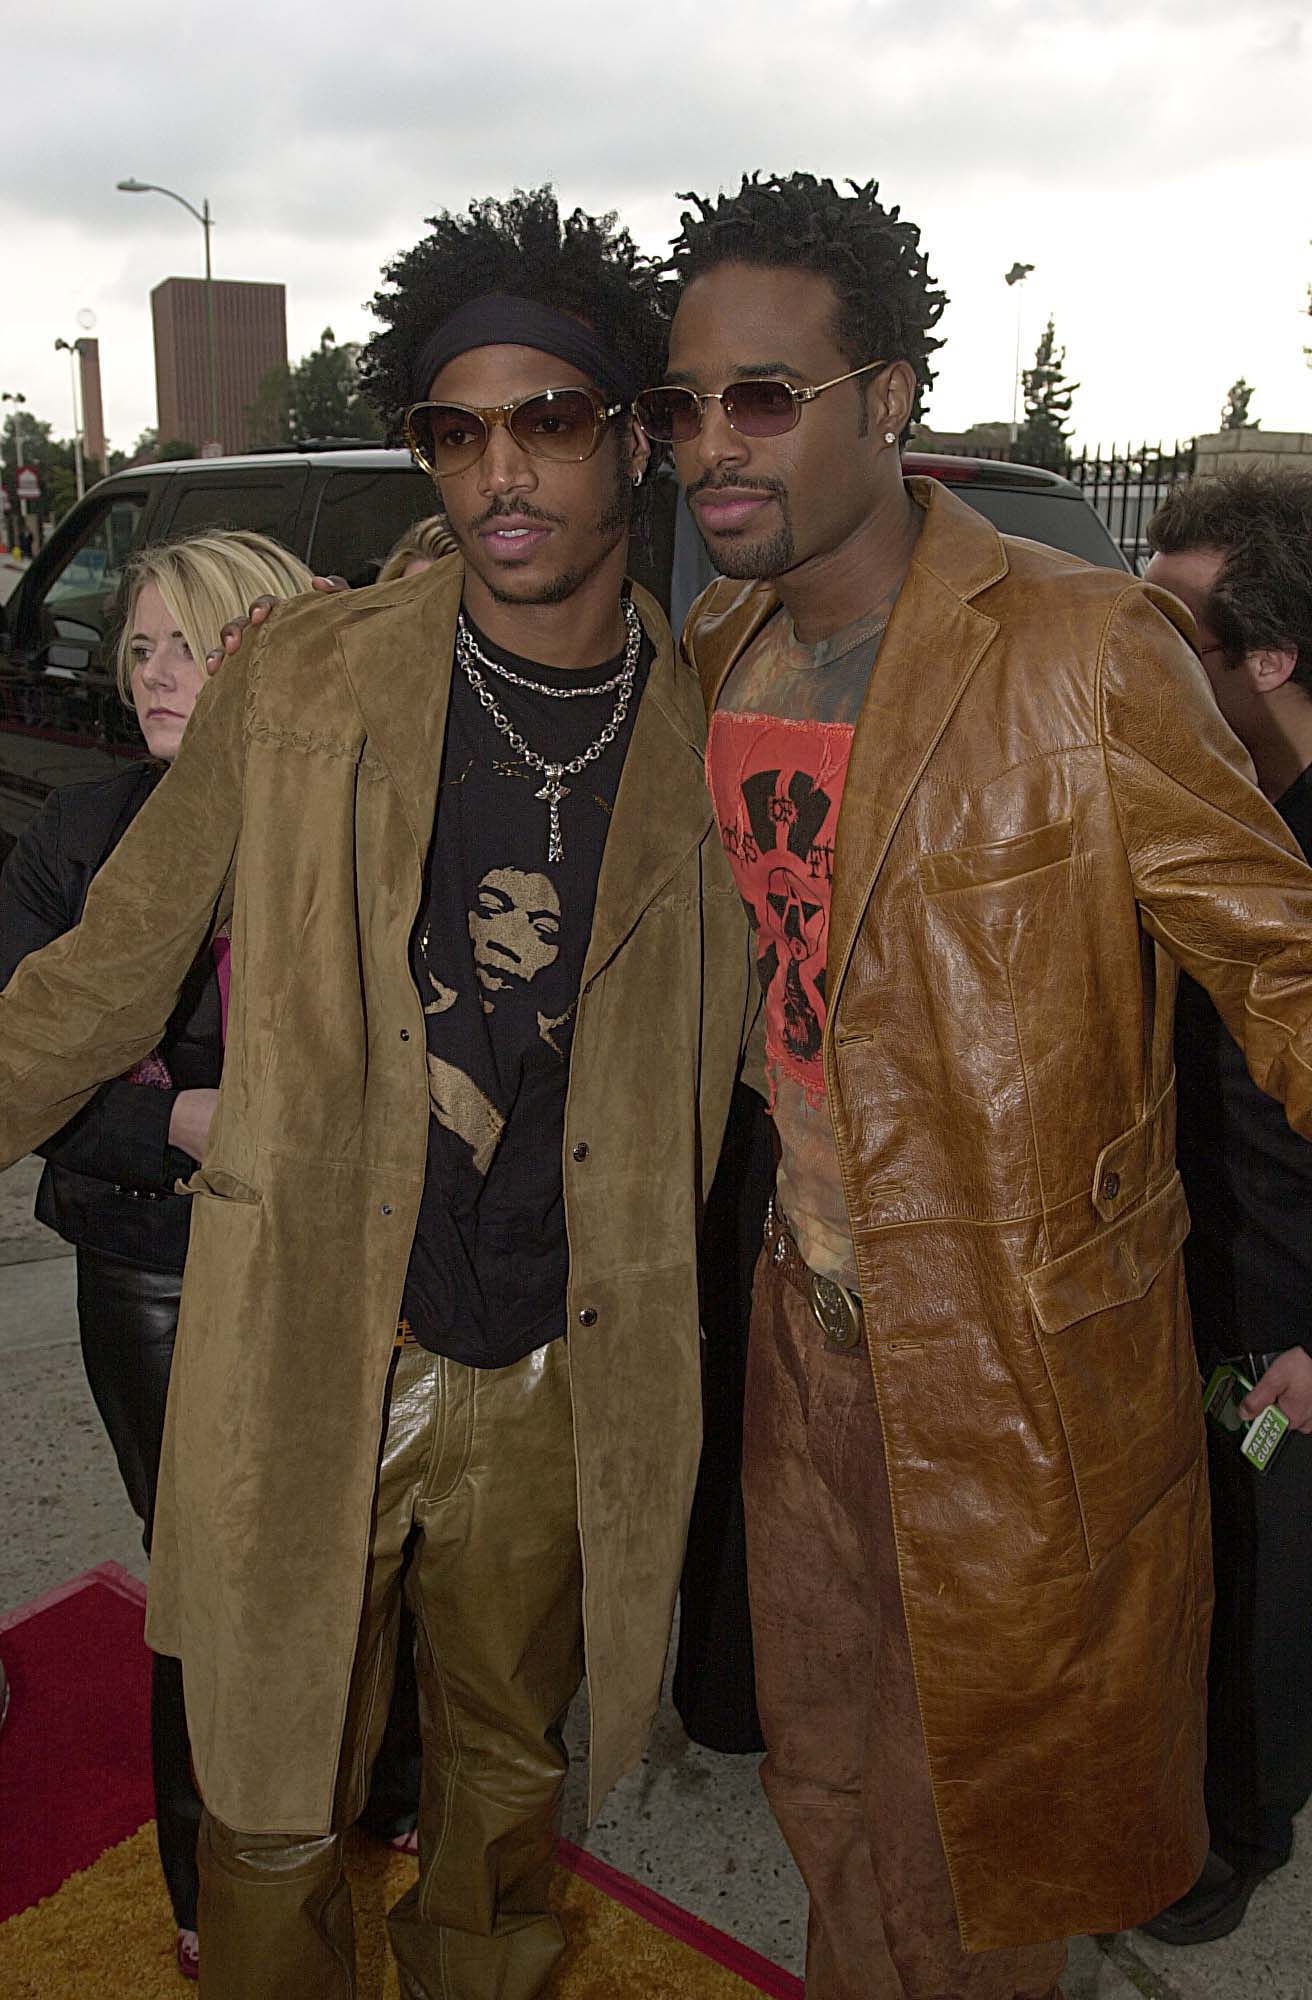 Marlon Wayans and Shawn Wayans at the 2001 MTV Movie Awards on June 2, 2001, in Los Angeles, California, United States. | Source: Getty Images